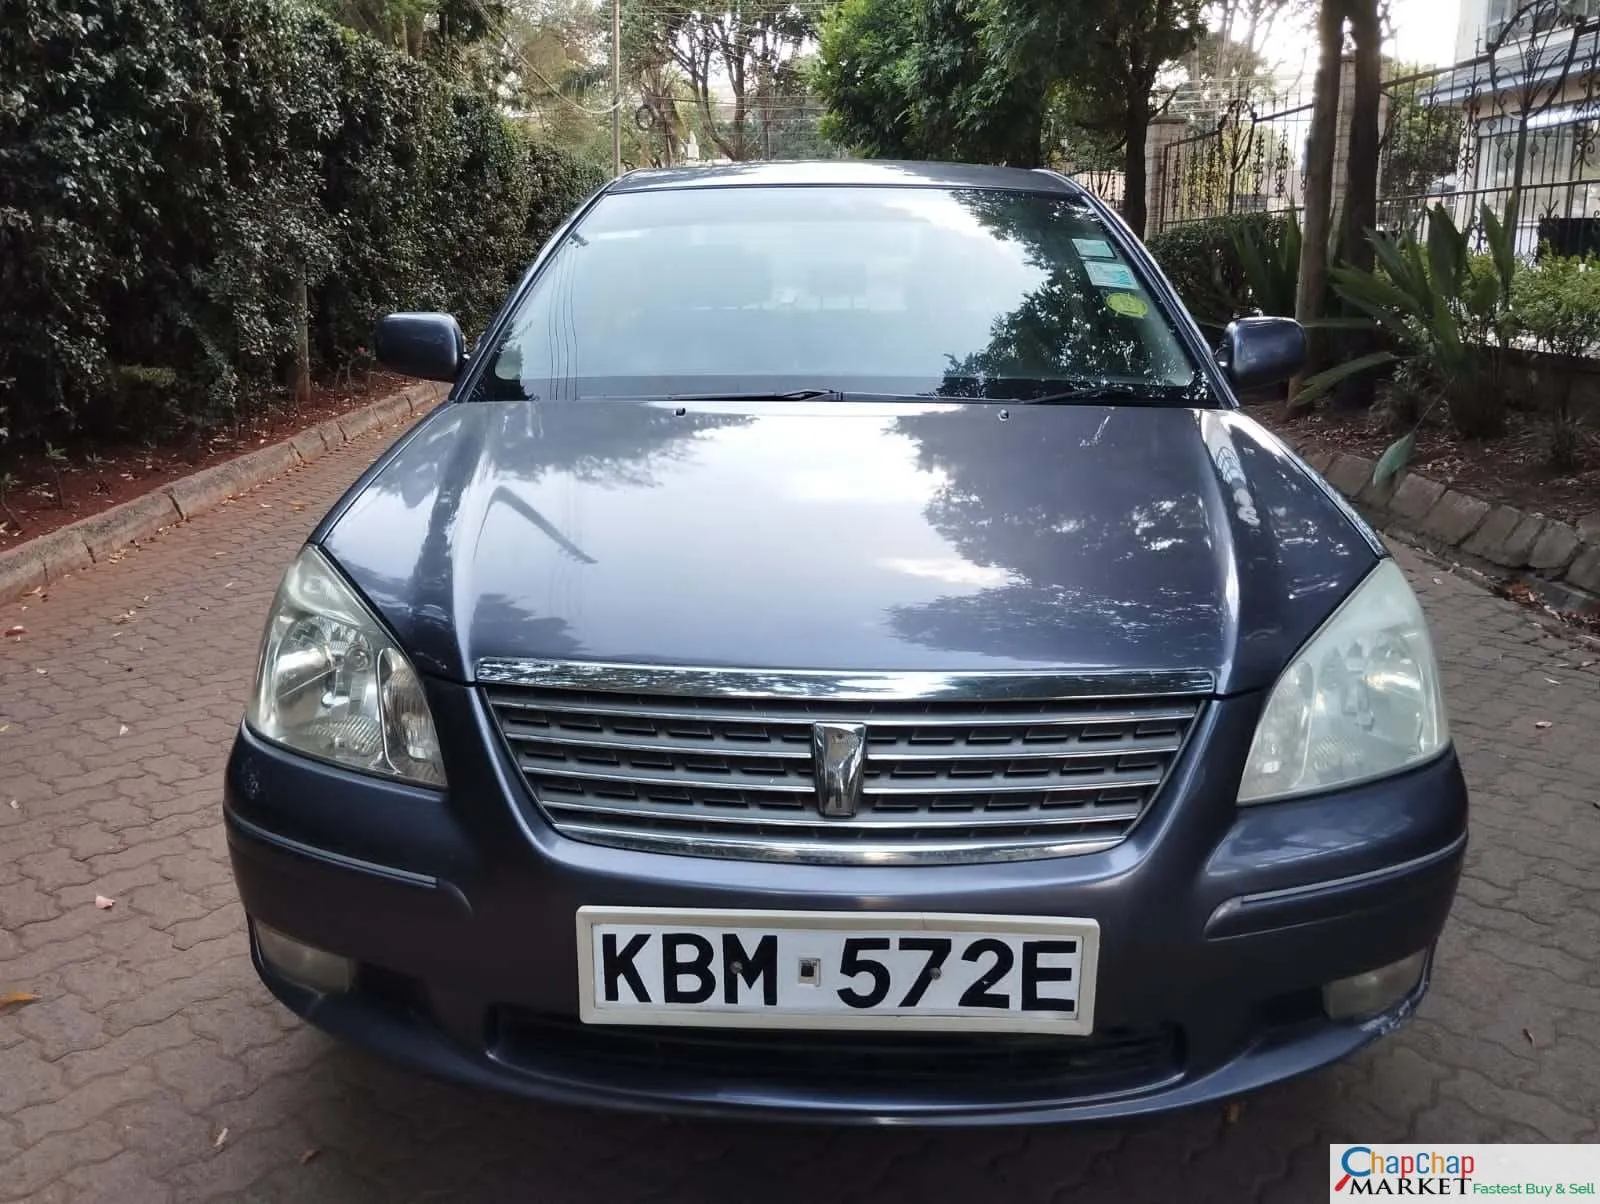 Toyota PREMIO for sale in Kenya hire purchase installments You pay 30% Deposit Trade in Ok EXCLUSIVE Toyota premio Kenya 240